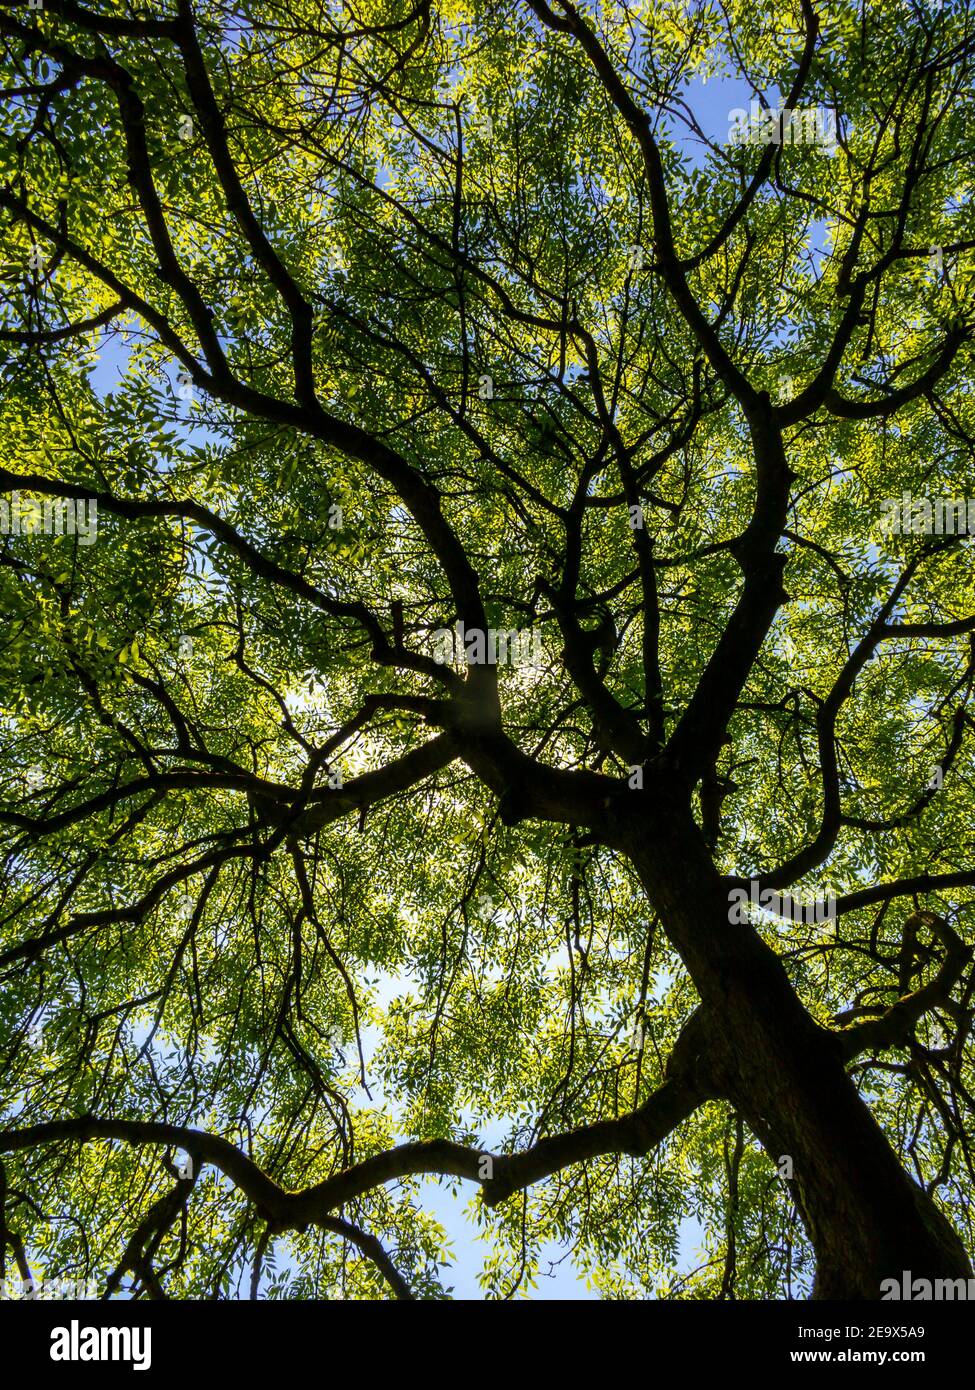 View looking up at the branches of a tree in full leaf in early summer with the trunk silhouetted. Stock Photo